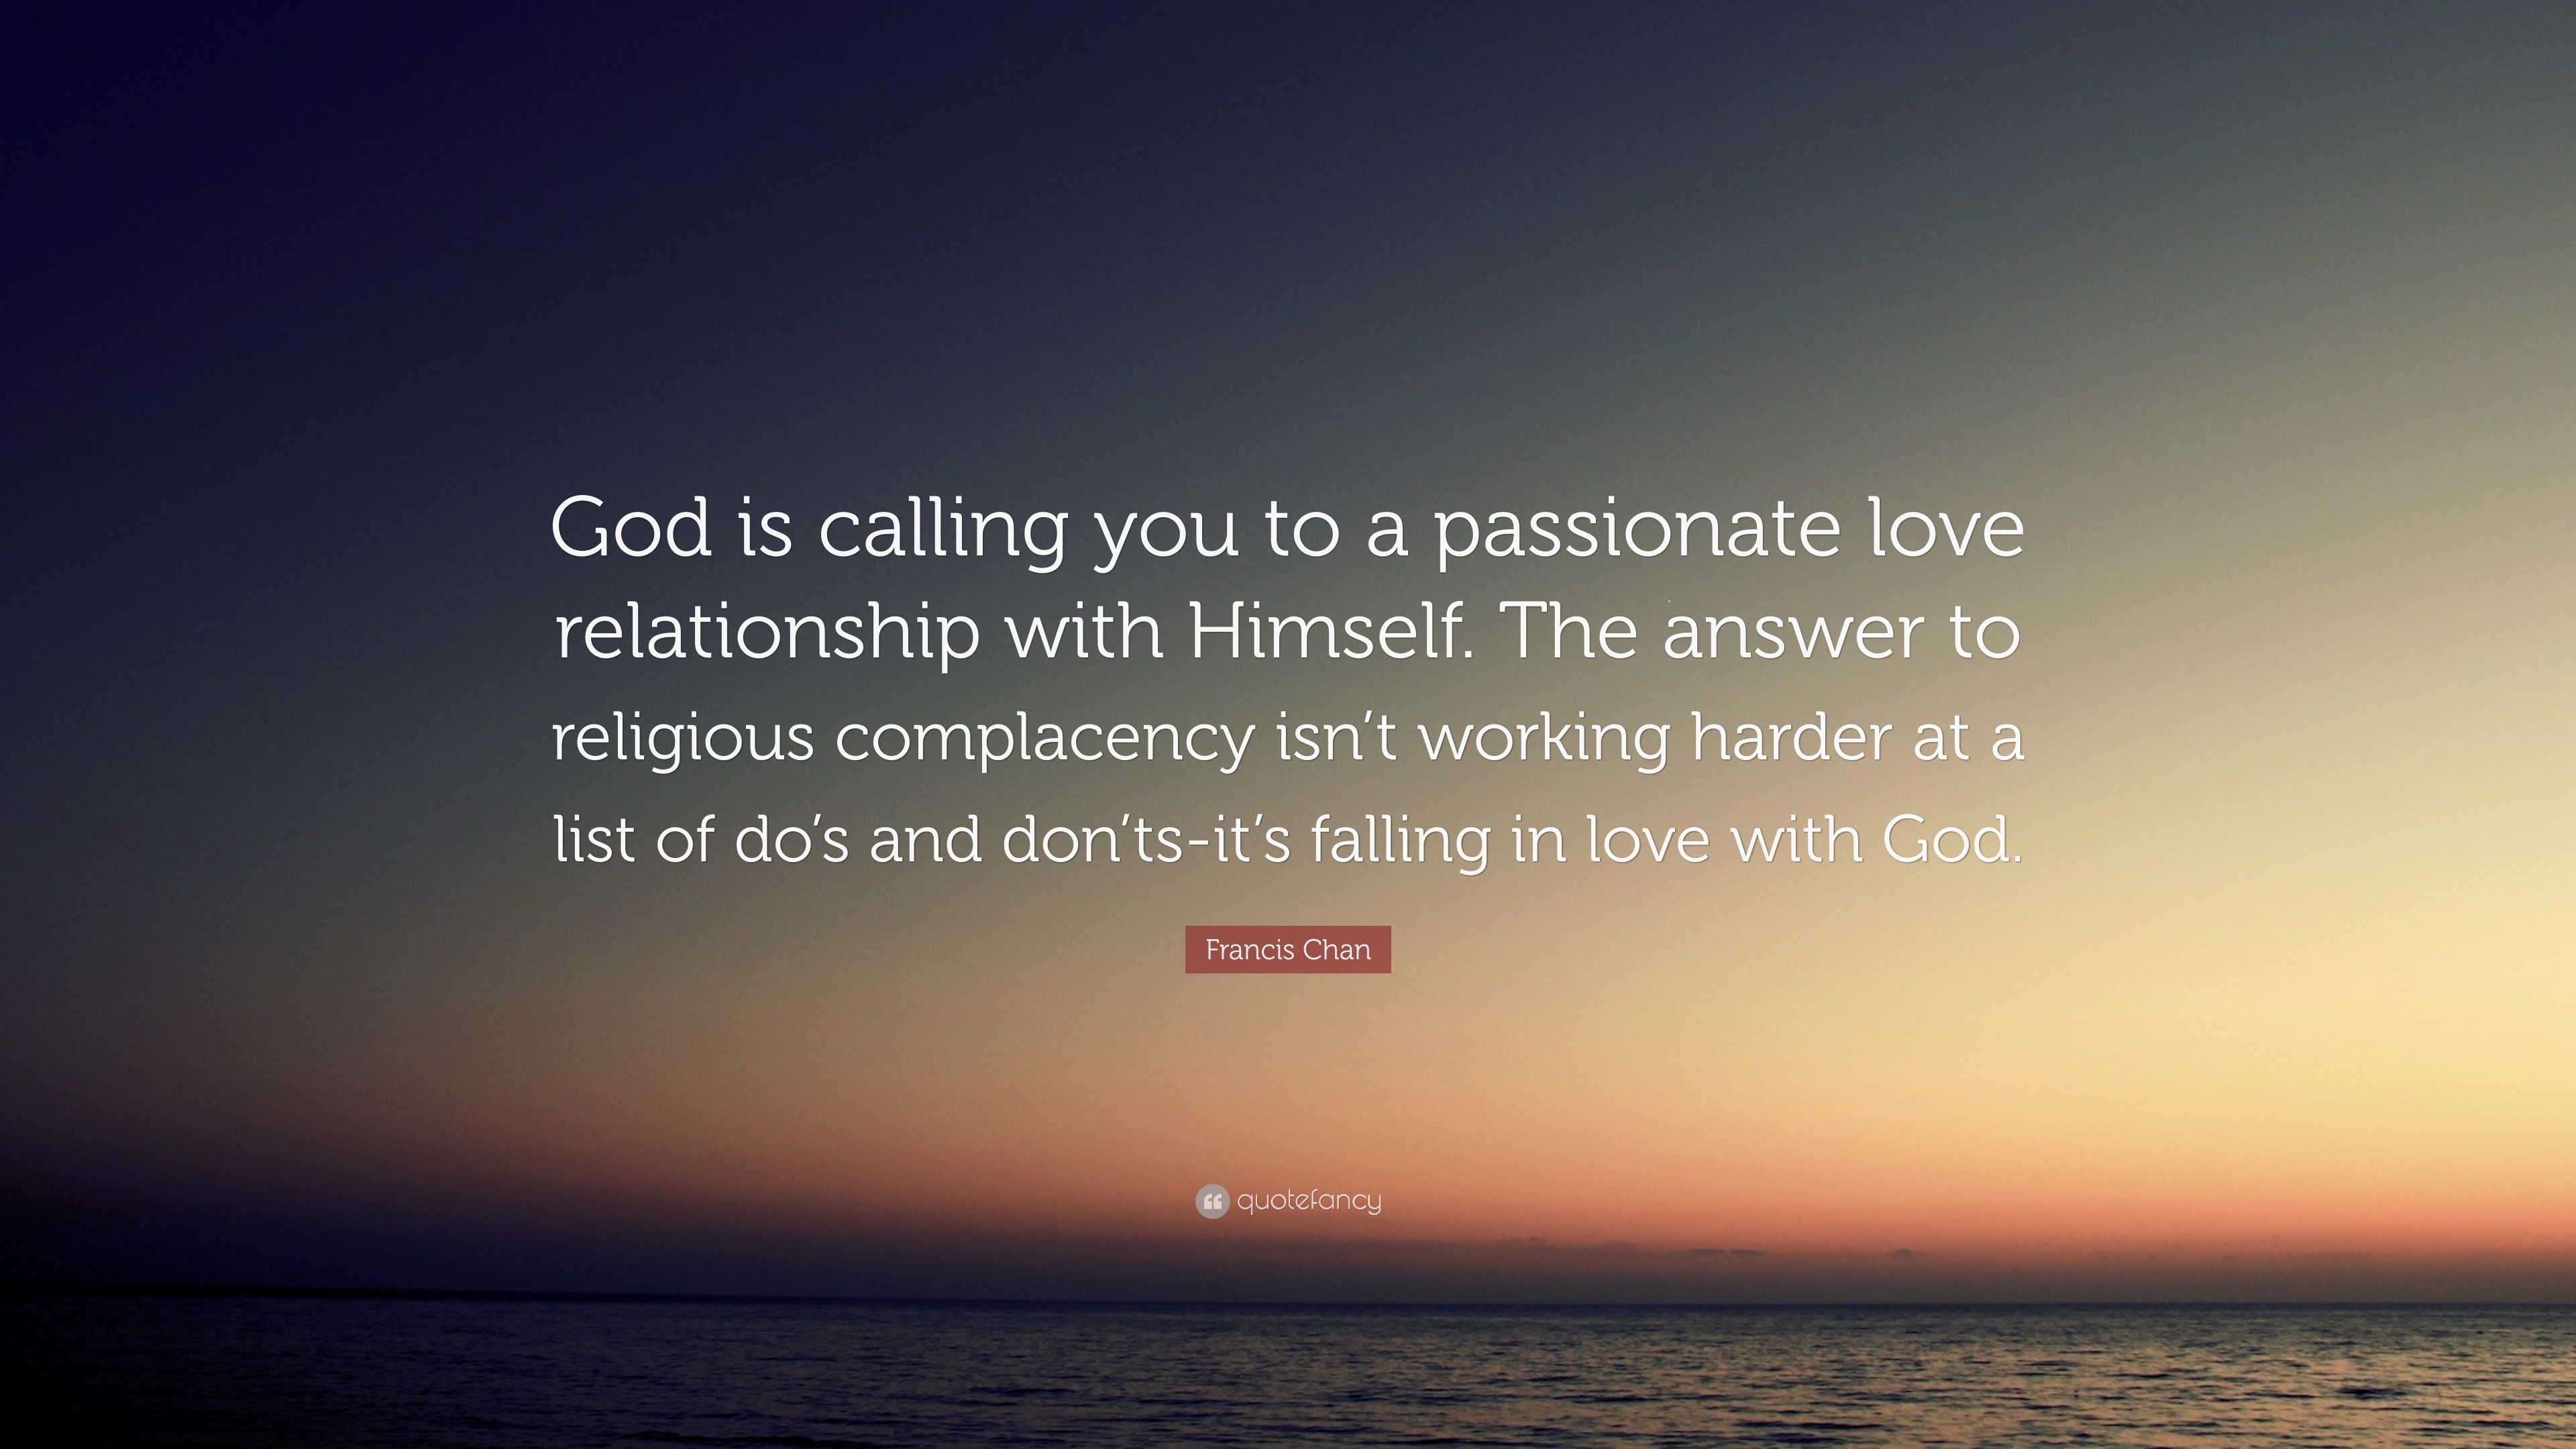 francis chan quote god is calling you to a passionate love relationship with himself the answer to religious complacency isn t working har 12 wallpapers quotefancy god is calling you to a passionate love